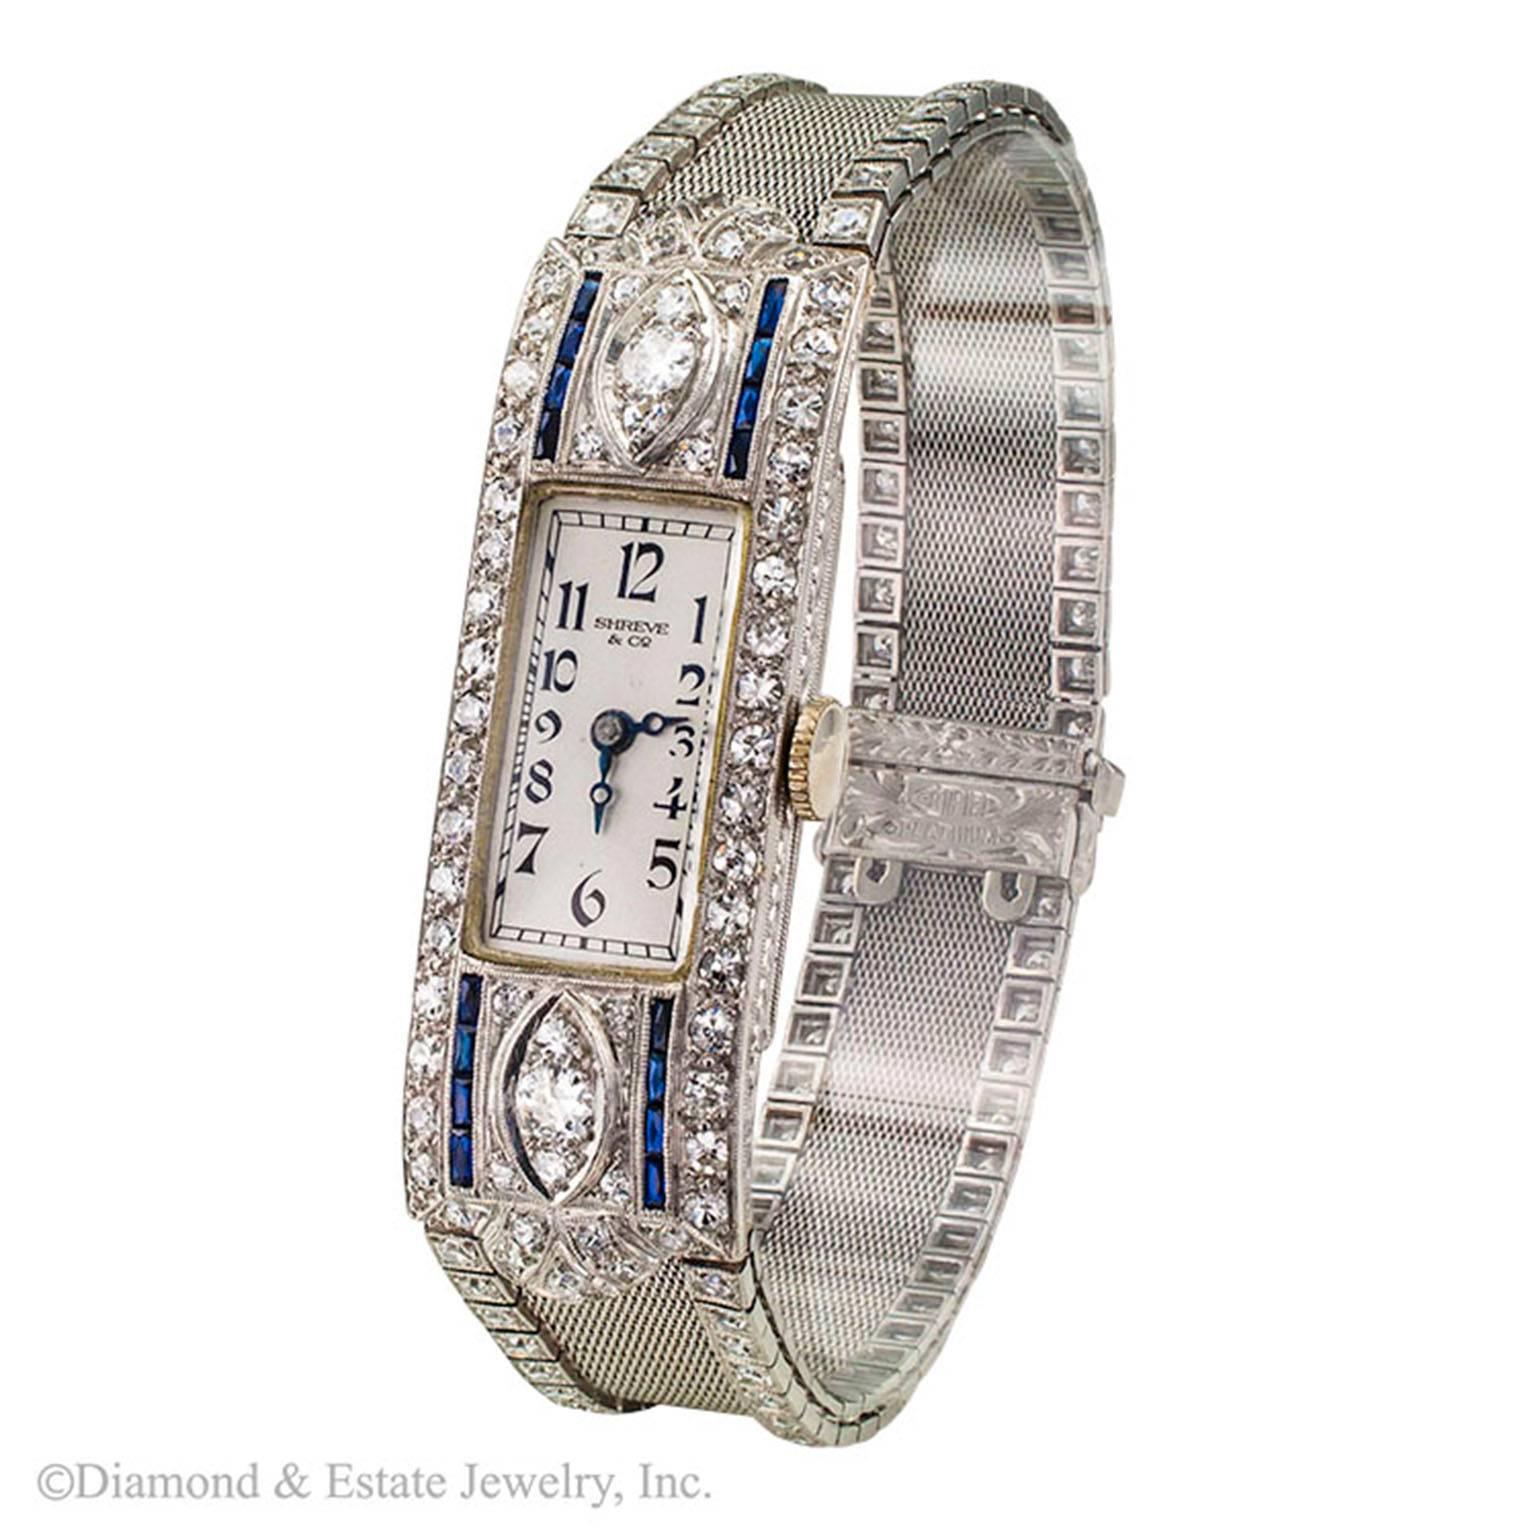 Shreve and Company Art Deco Diamond Platinum Wristwatch

Shreve & Co. Art Deco 17-jewel Concord Swiss movement lady's wristwatch circa 1925.  The easy to read rectangular dial features Arabic numerals and secondary markers framed by a similarly